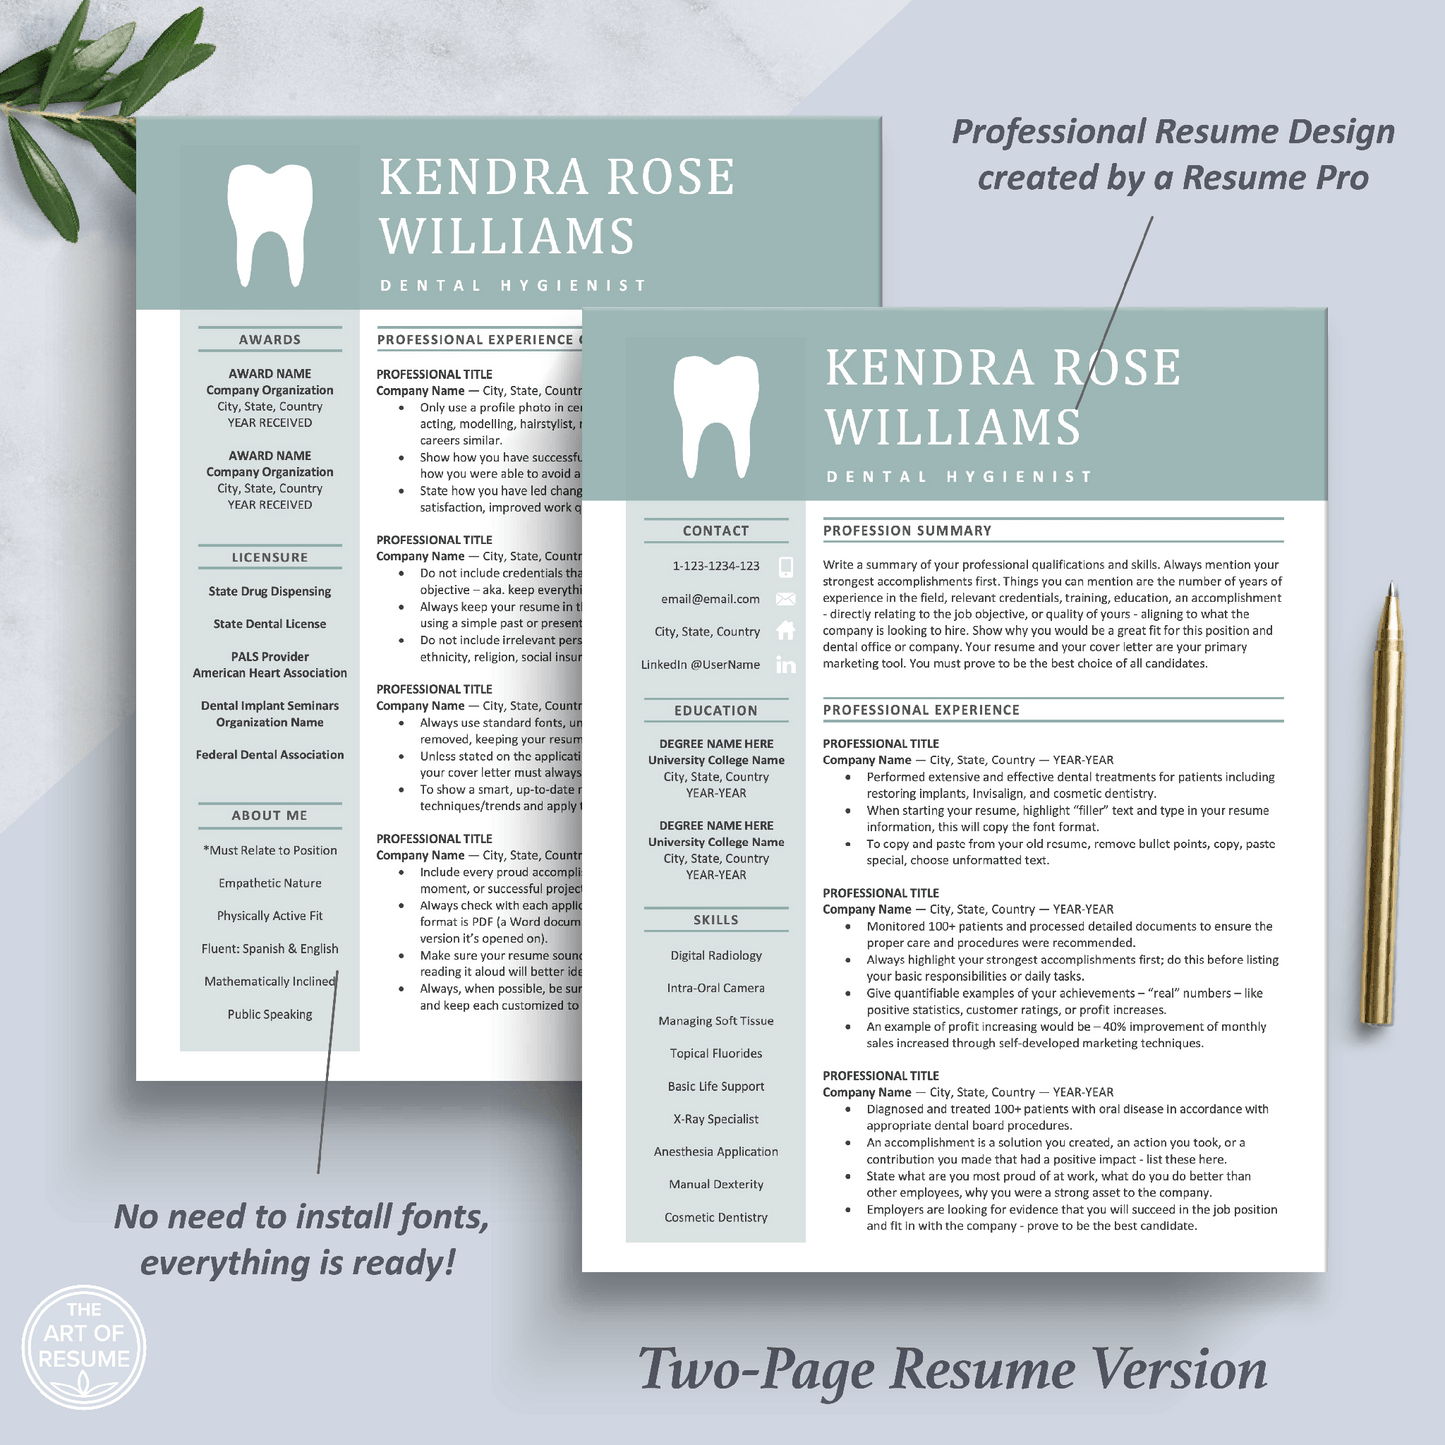 The Art of Resume Templates | Two Page Dentist, Hygienist, Dental Student, Assistant Executive Resume CV Template | Curriculum Vitae